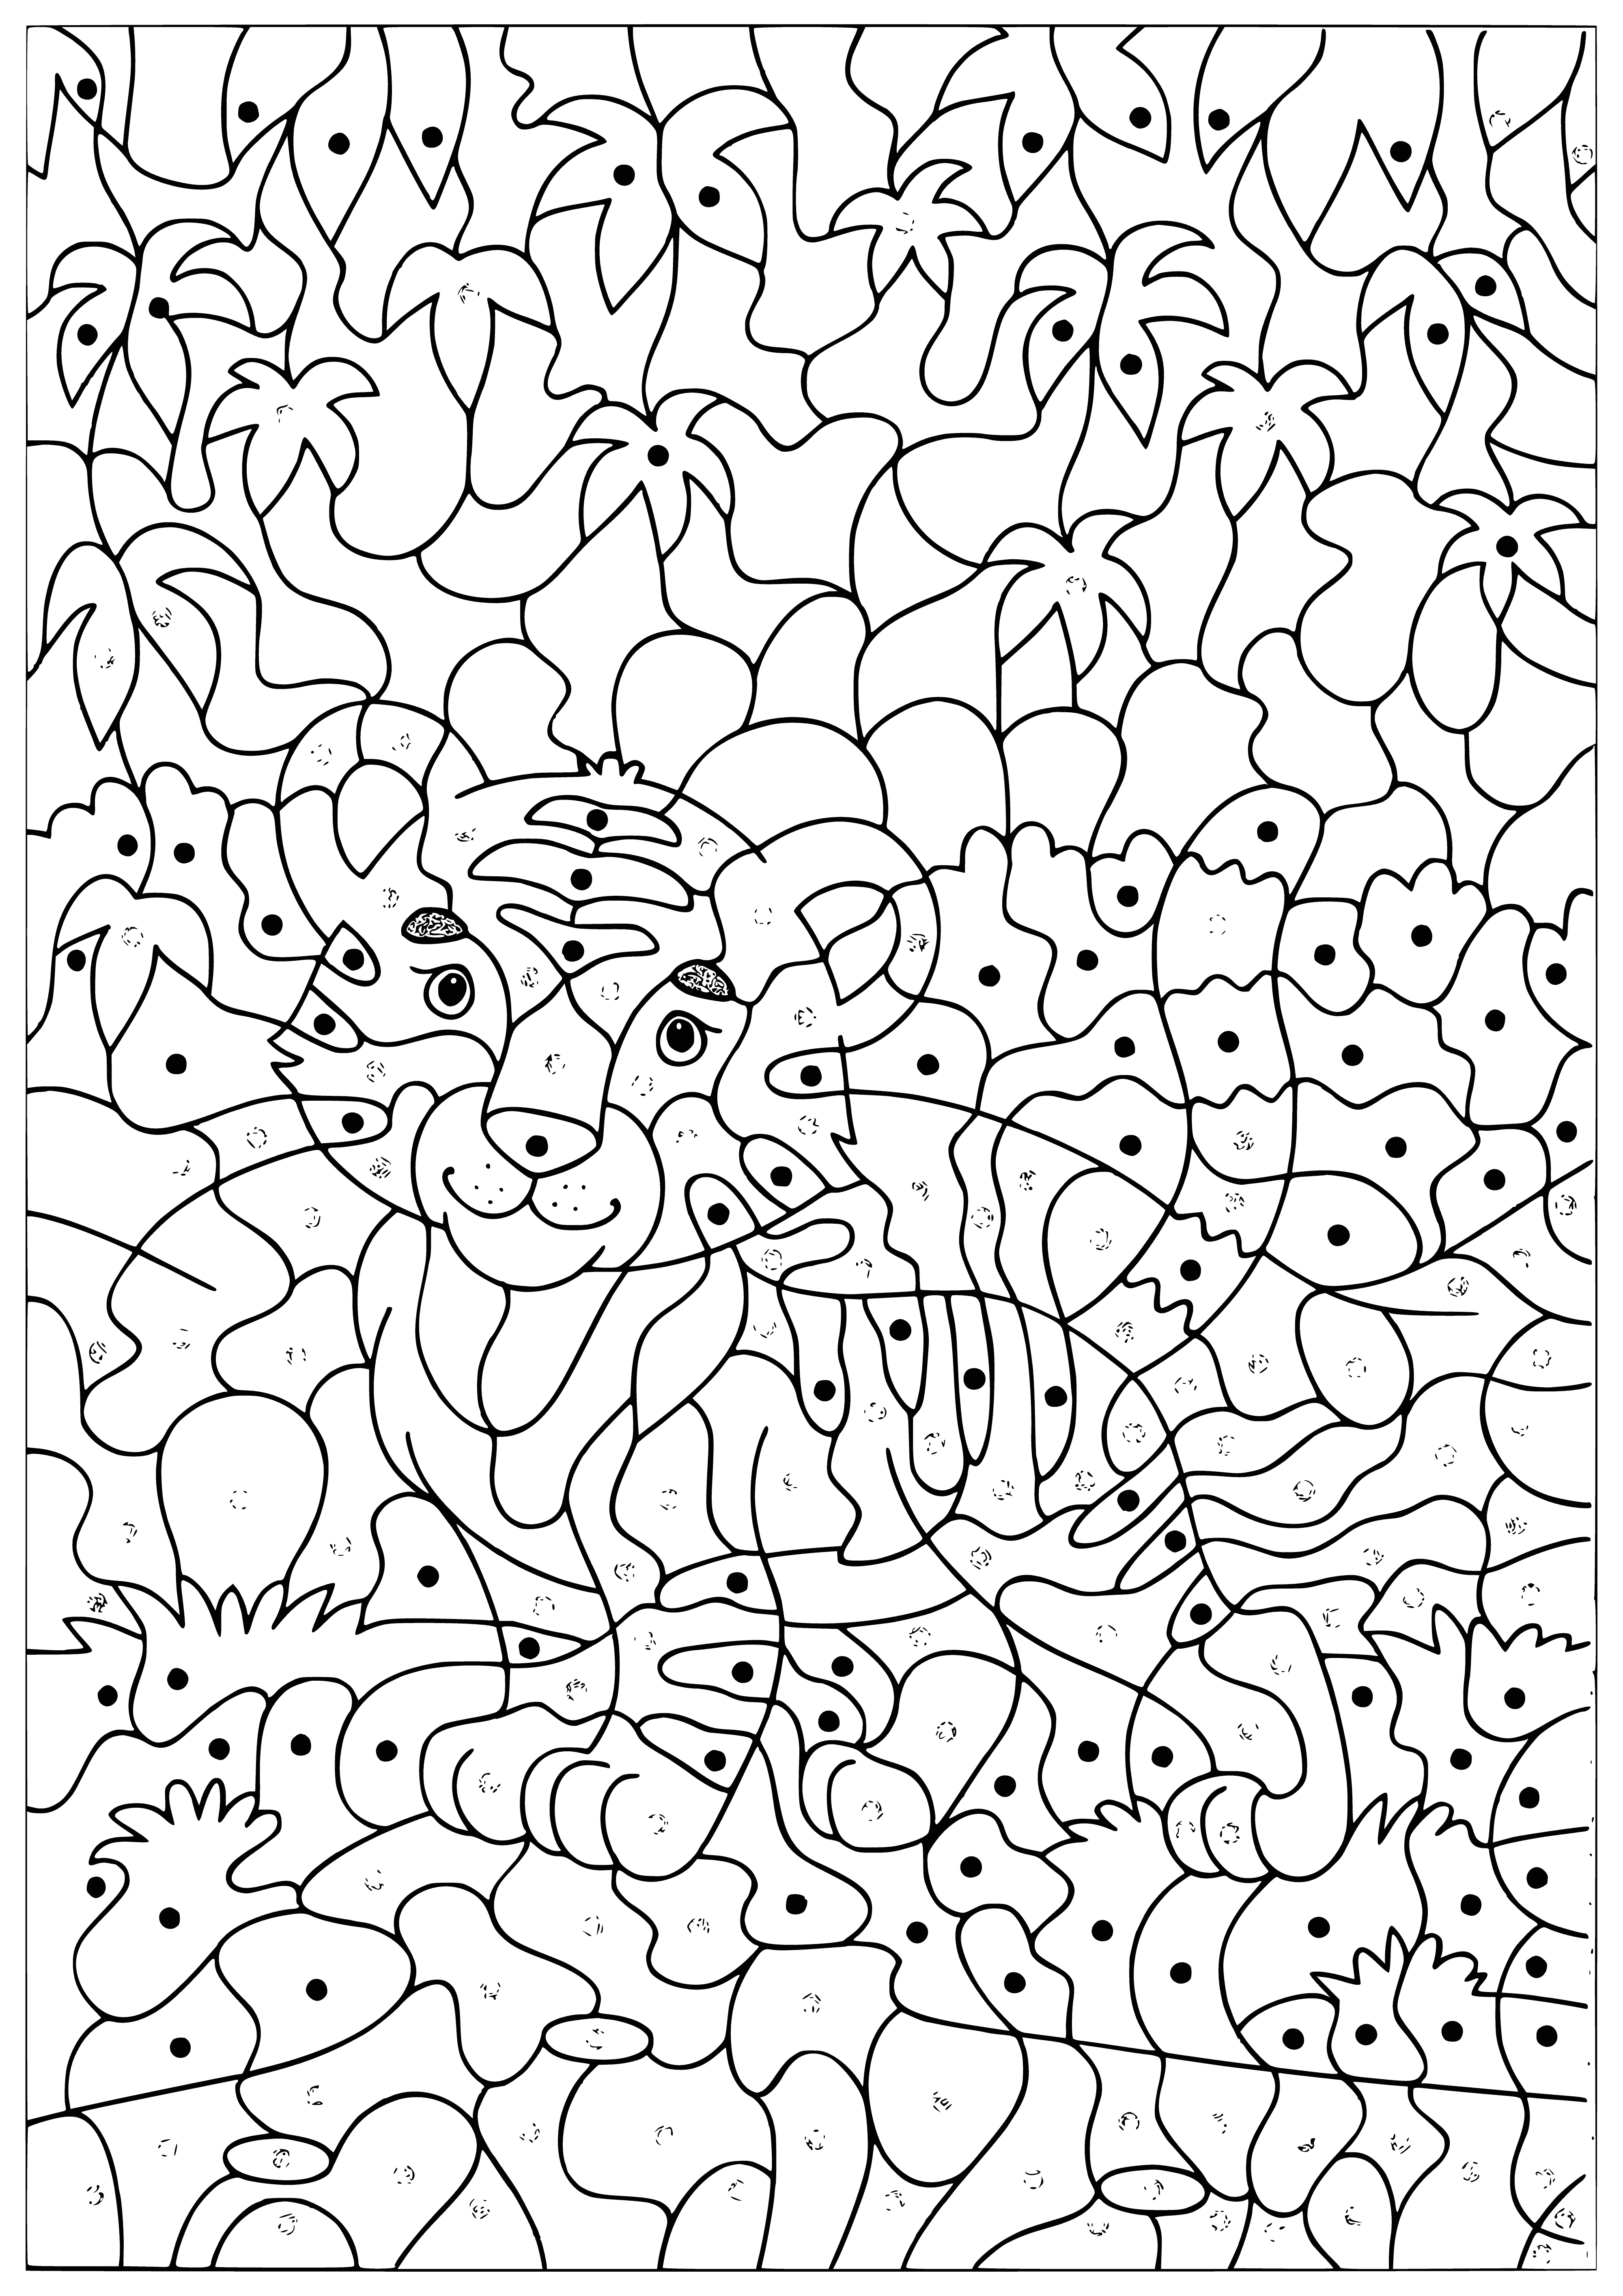 coloring page: Cute tiger cub sits with back to viewer, orange fur w/black stripes, white belly & paws, head turned to side, ears perked, green eyes.